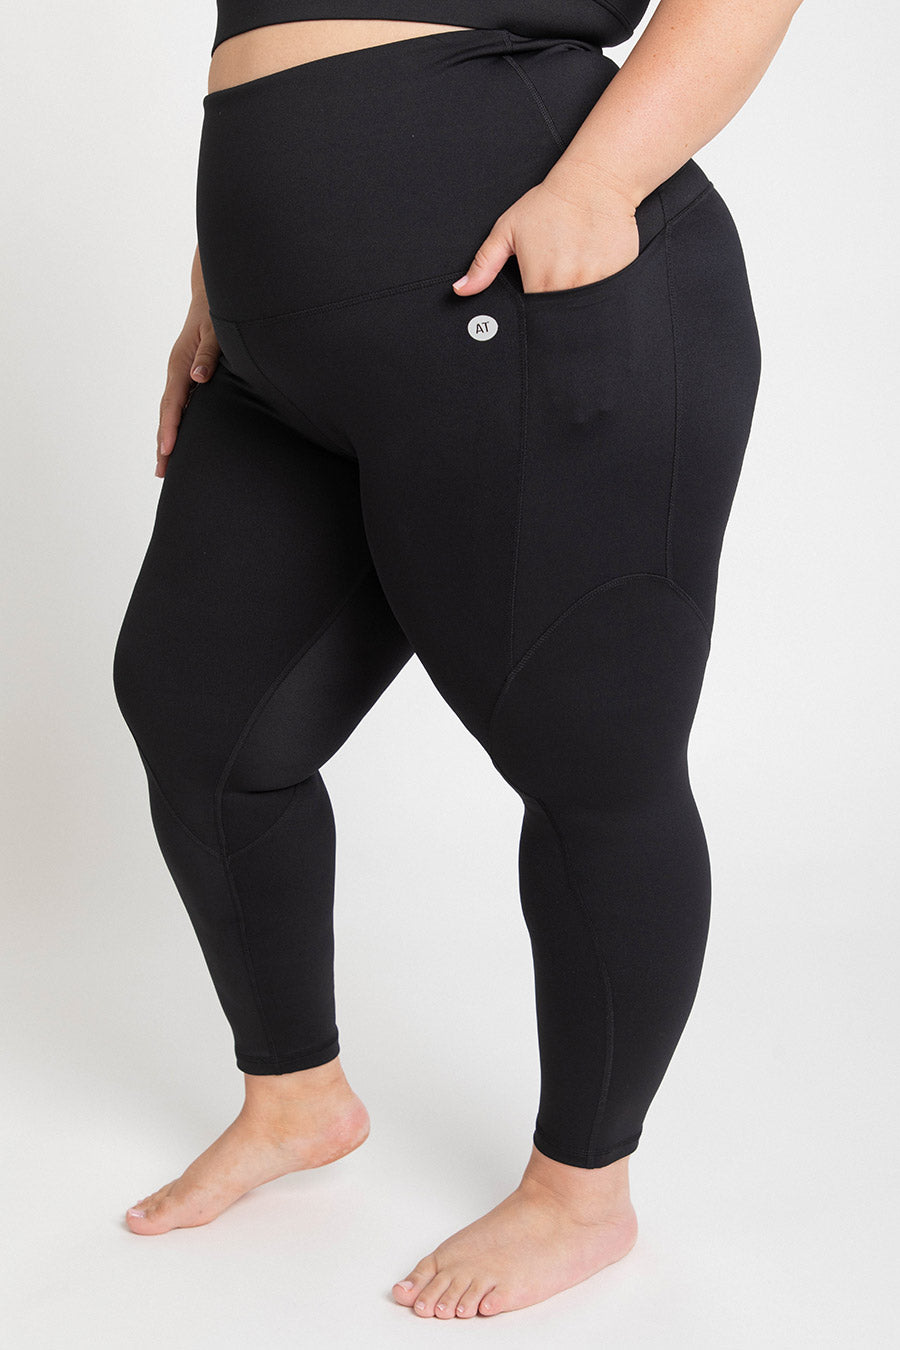 Ultimate Sports Compression Leggings, Firm High-Rise Panel with Pockets